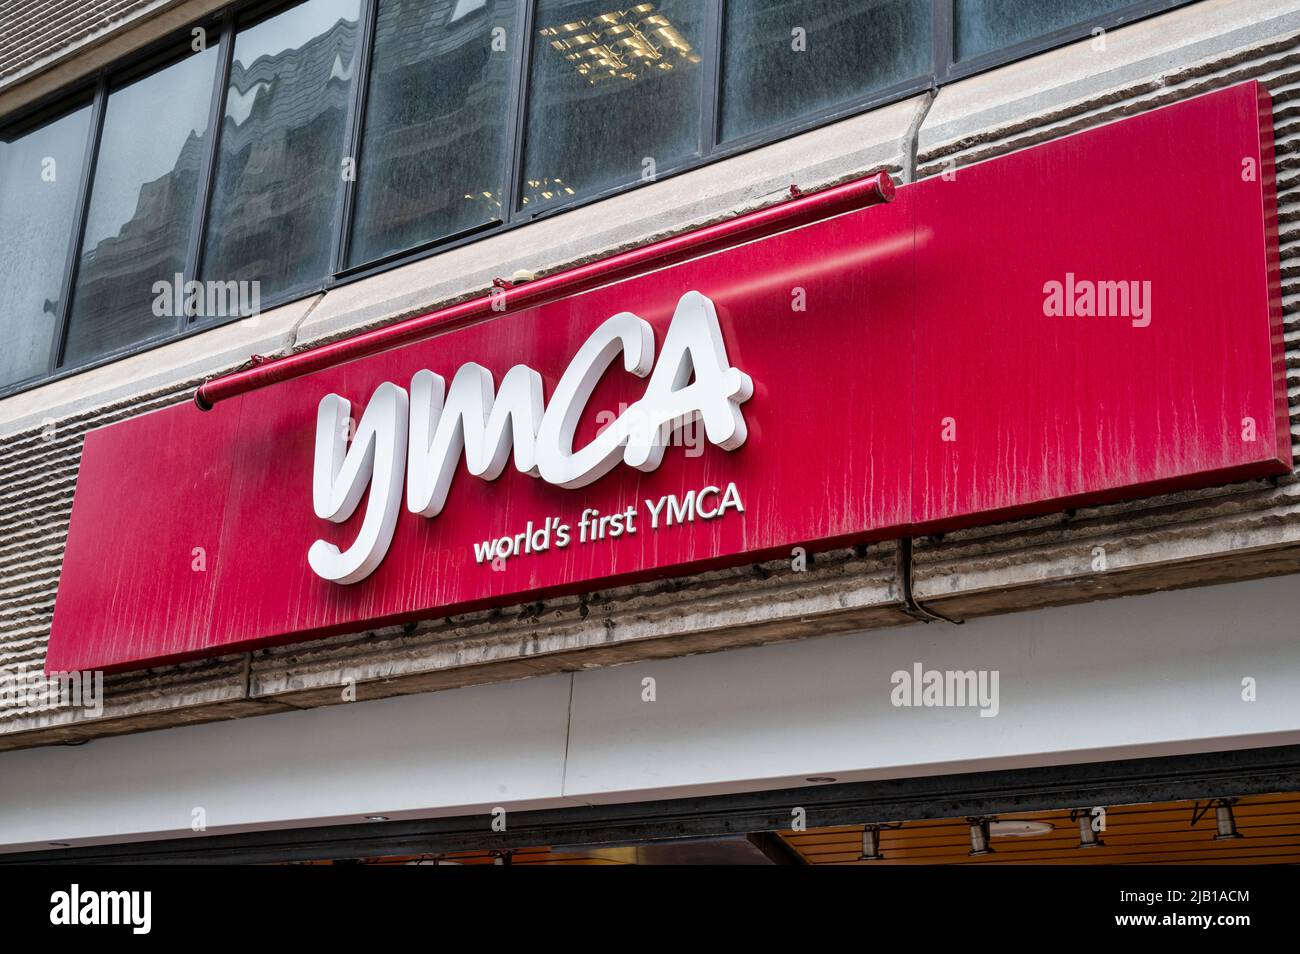 London, UK- May 3, 2022: The sign for the world's first YMCA located in London Stock Photo